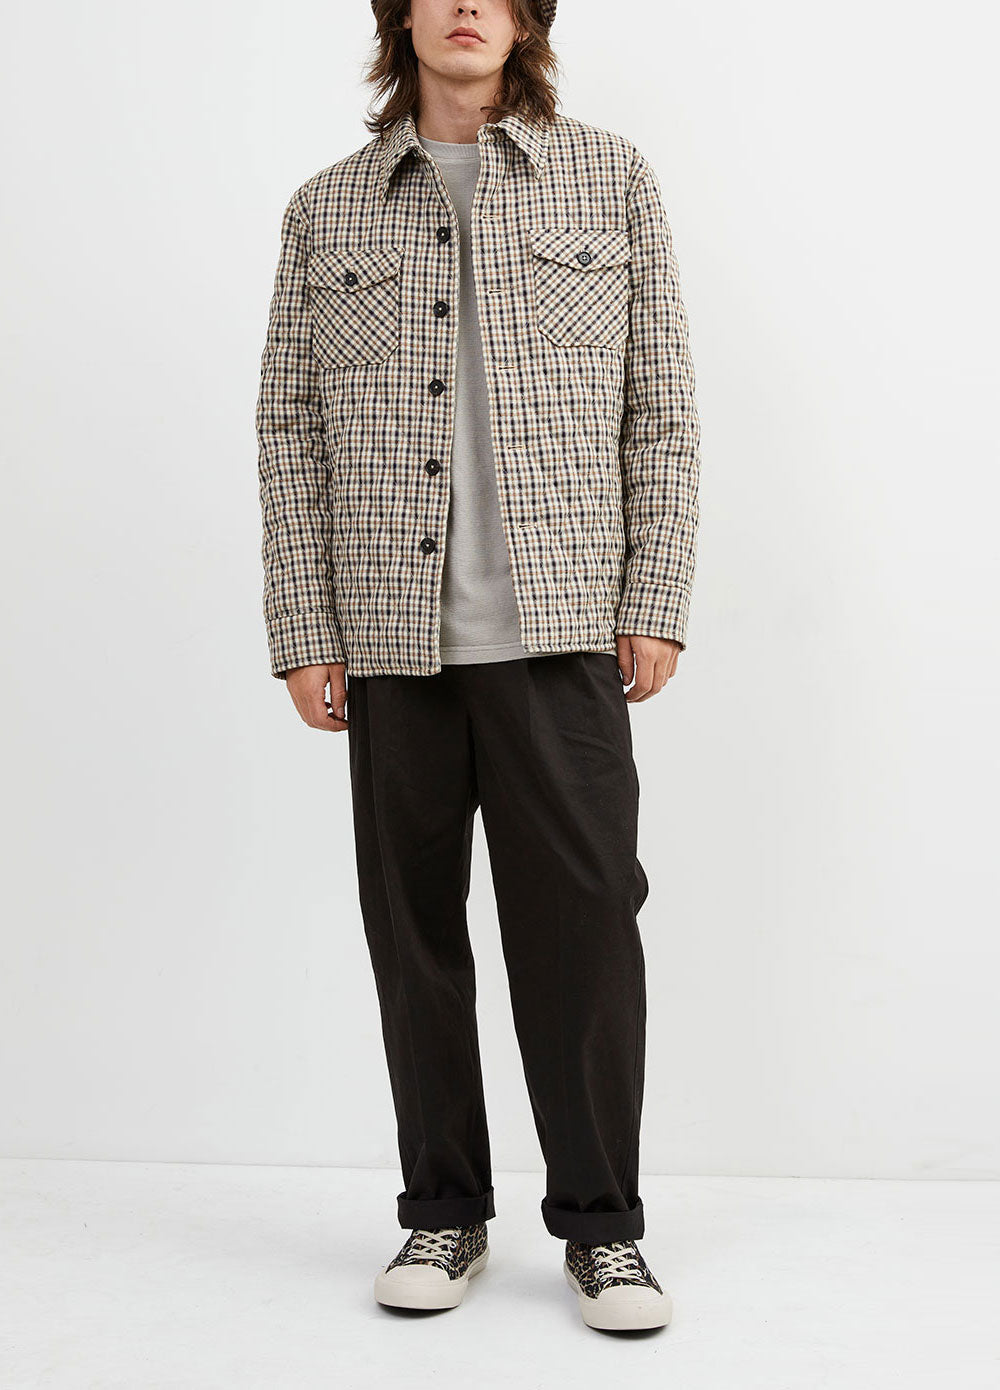 Men's Cream check Austin Jacket by Incu Collection | Incu